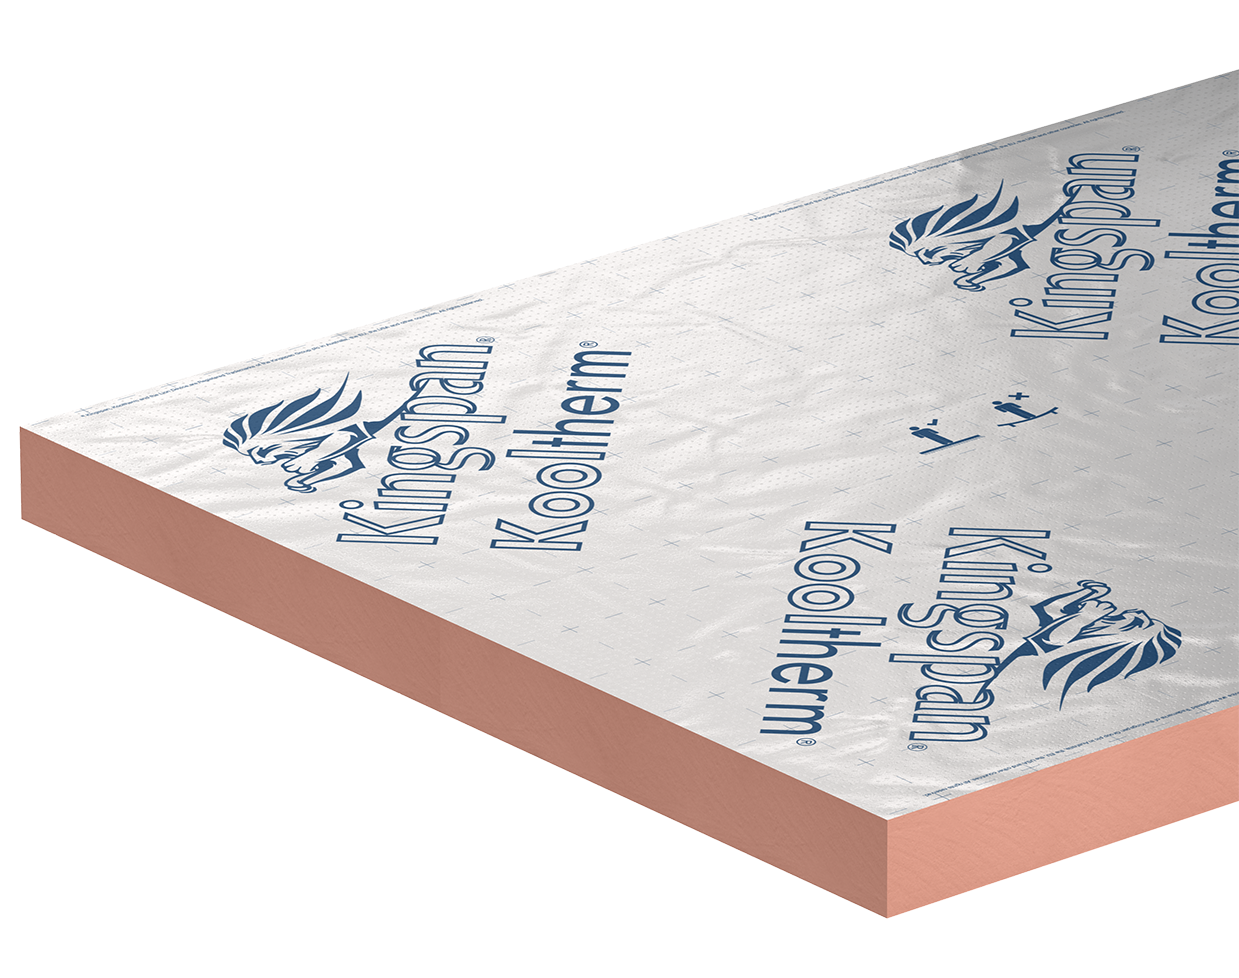 Kingspan Kooltherm K107 Pitched Roof Insulation - 2400mm x 1200mm x 150mm (pack of 2 sheets 5.76m2)